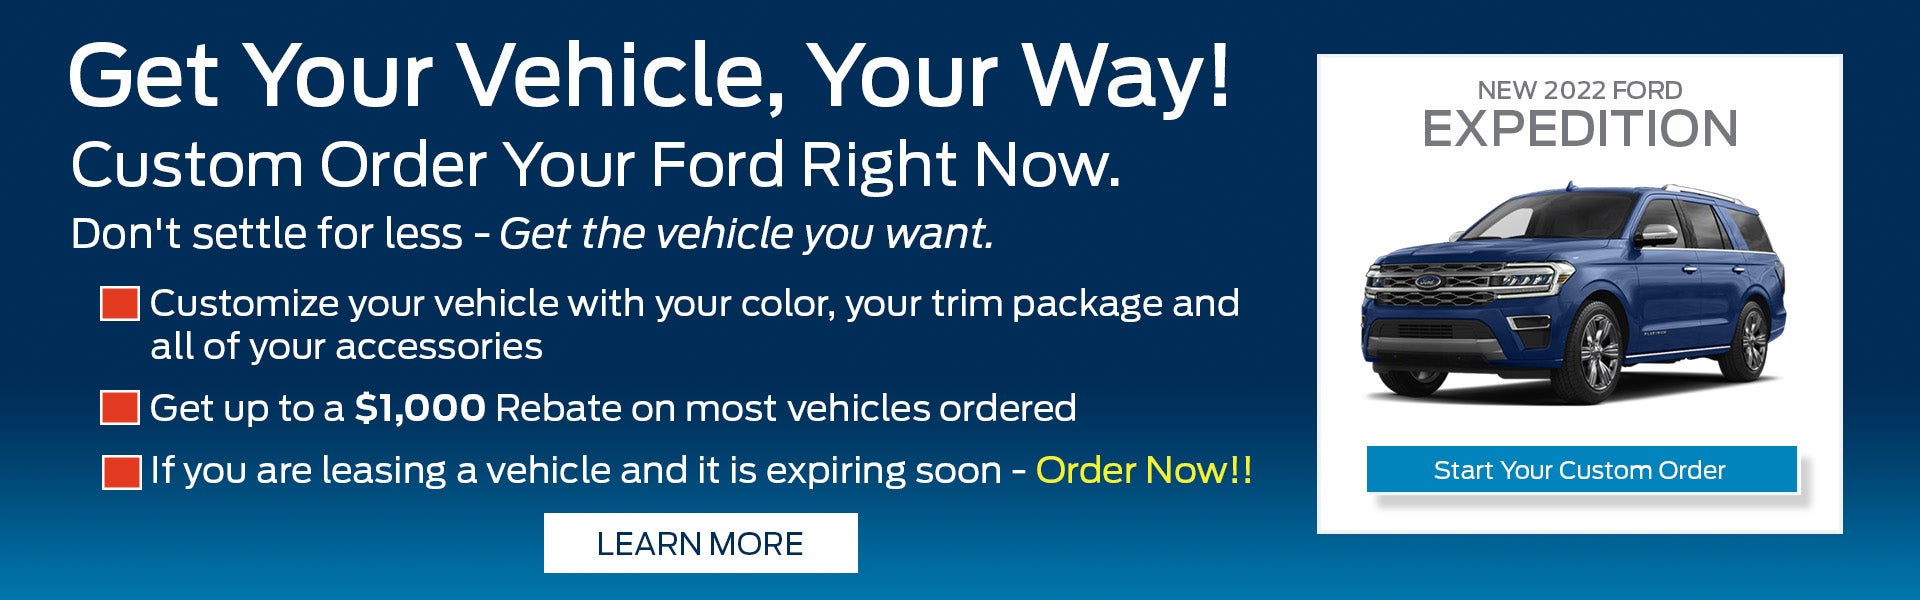 Custom Order Your Ford Right Now.